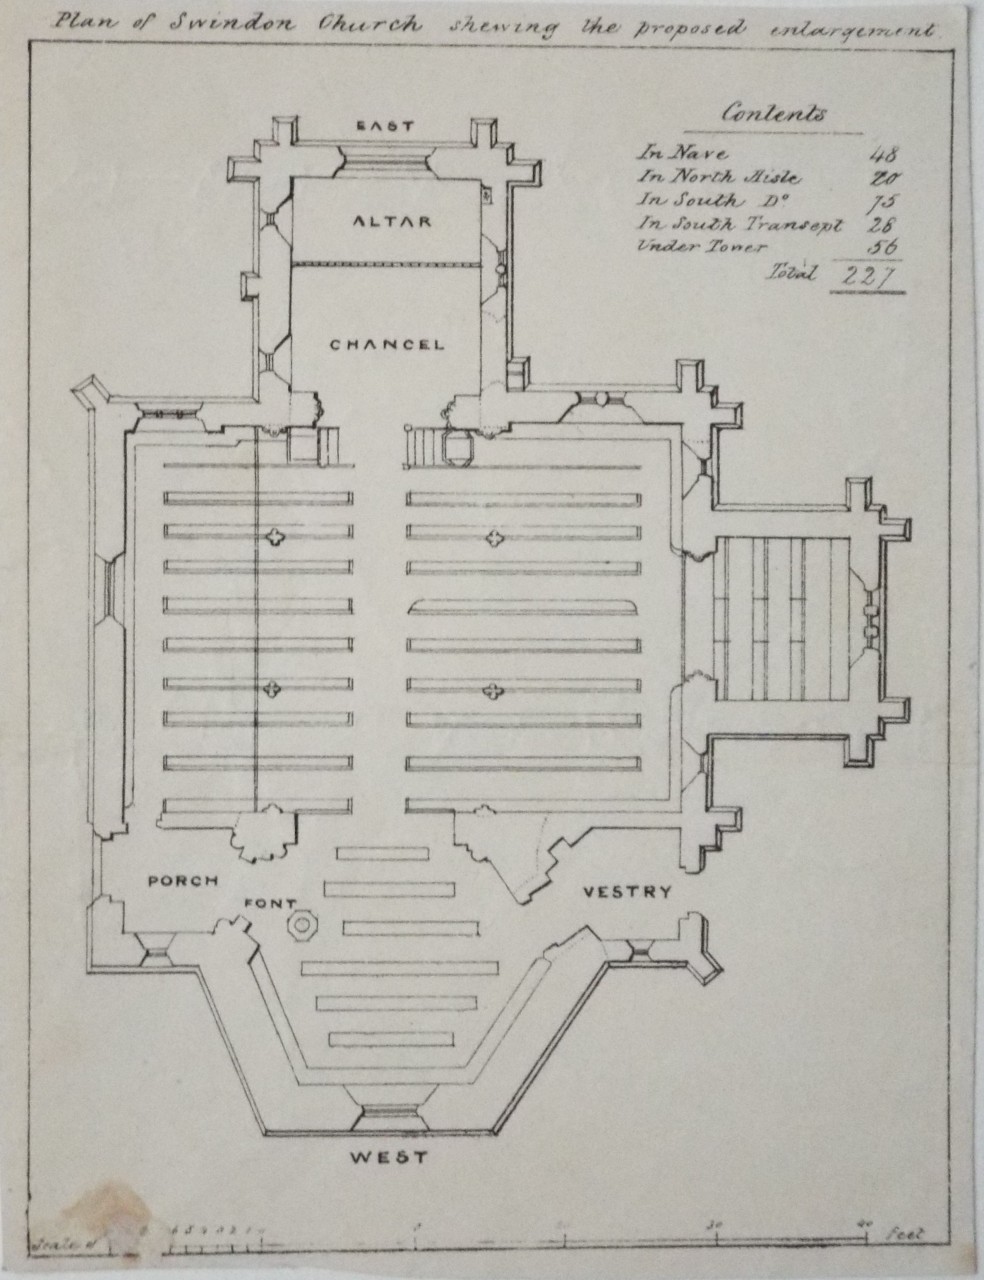 Lithograph - Plan of Swindon Church shewing the proposed enlargement